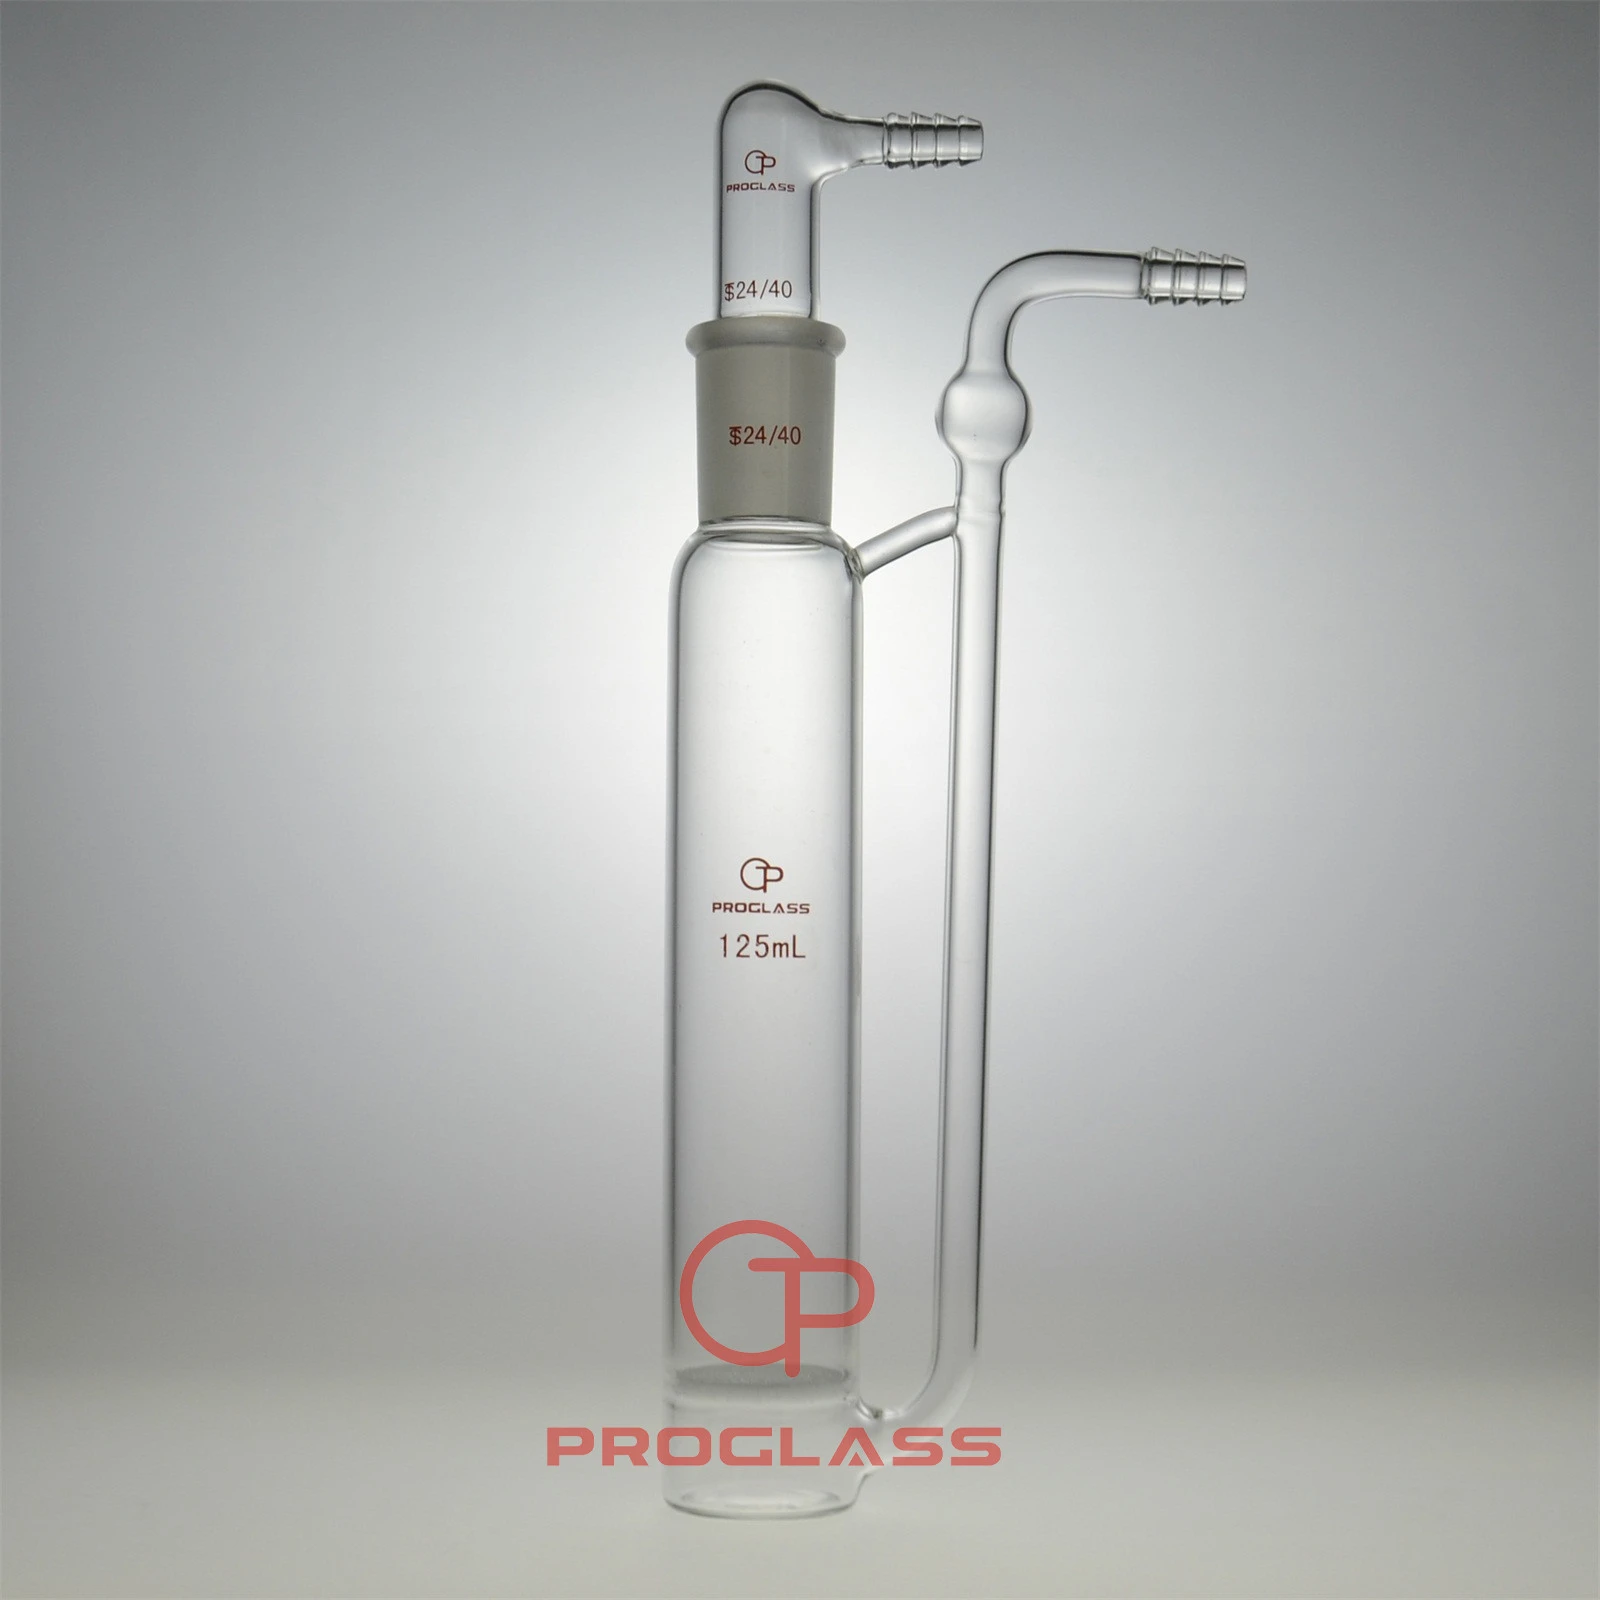 Washing Bottles instrument,G2 Fritted Disc lab glass gas washing bottle with disc Fritted 125mL 250mL 350mL 500mL